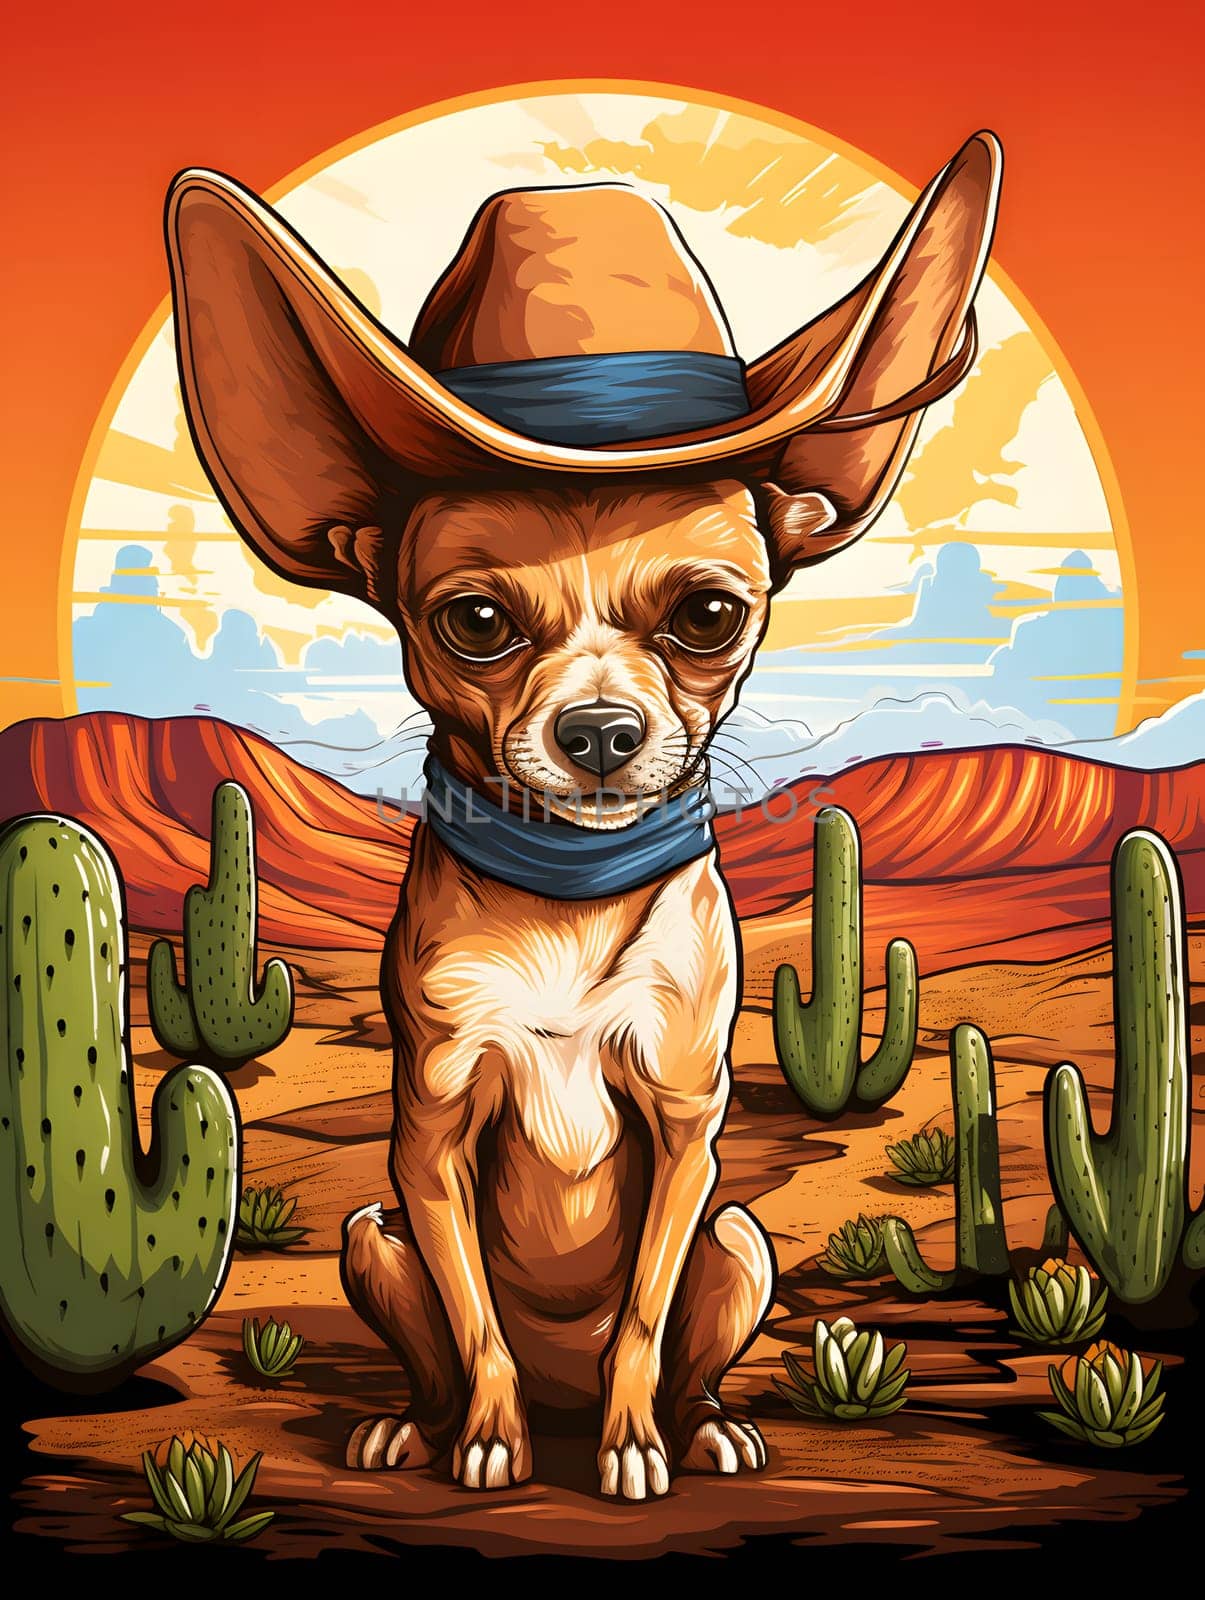 The Charming Chihuahua Wrangler: A Playful Pup in a Cowboy Hat by Nadtochiy